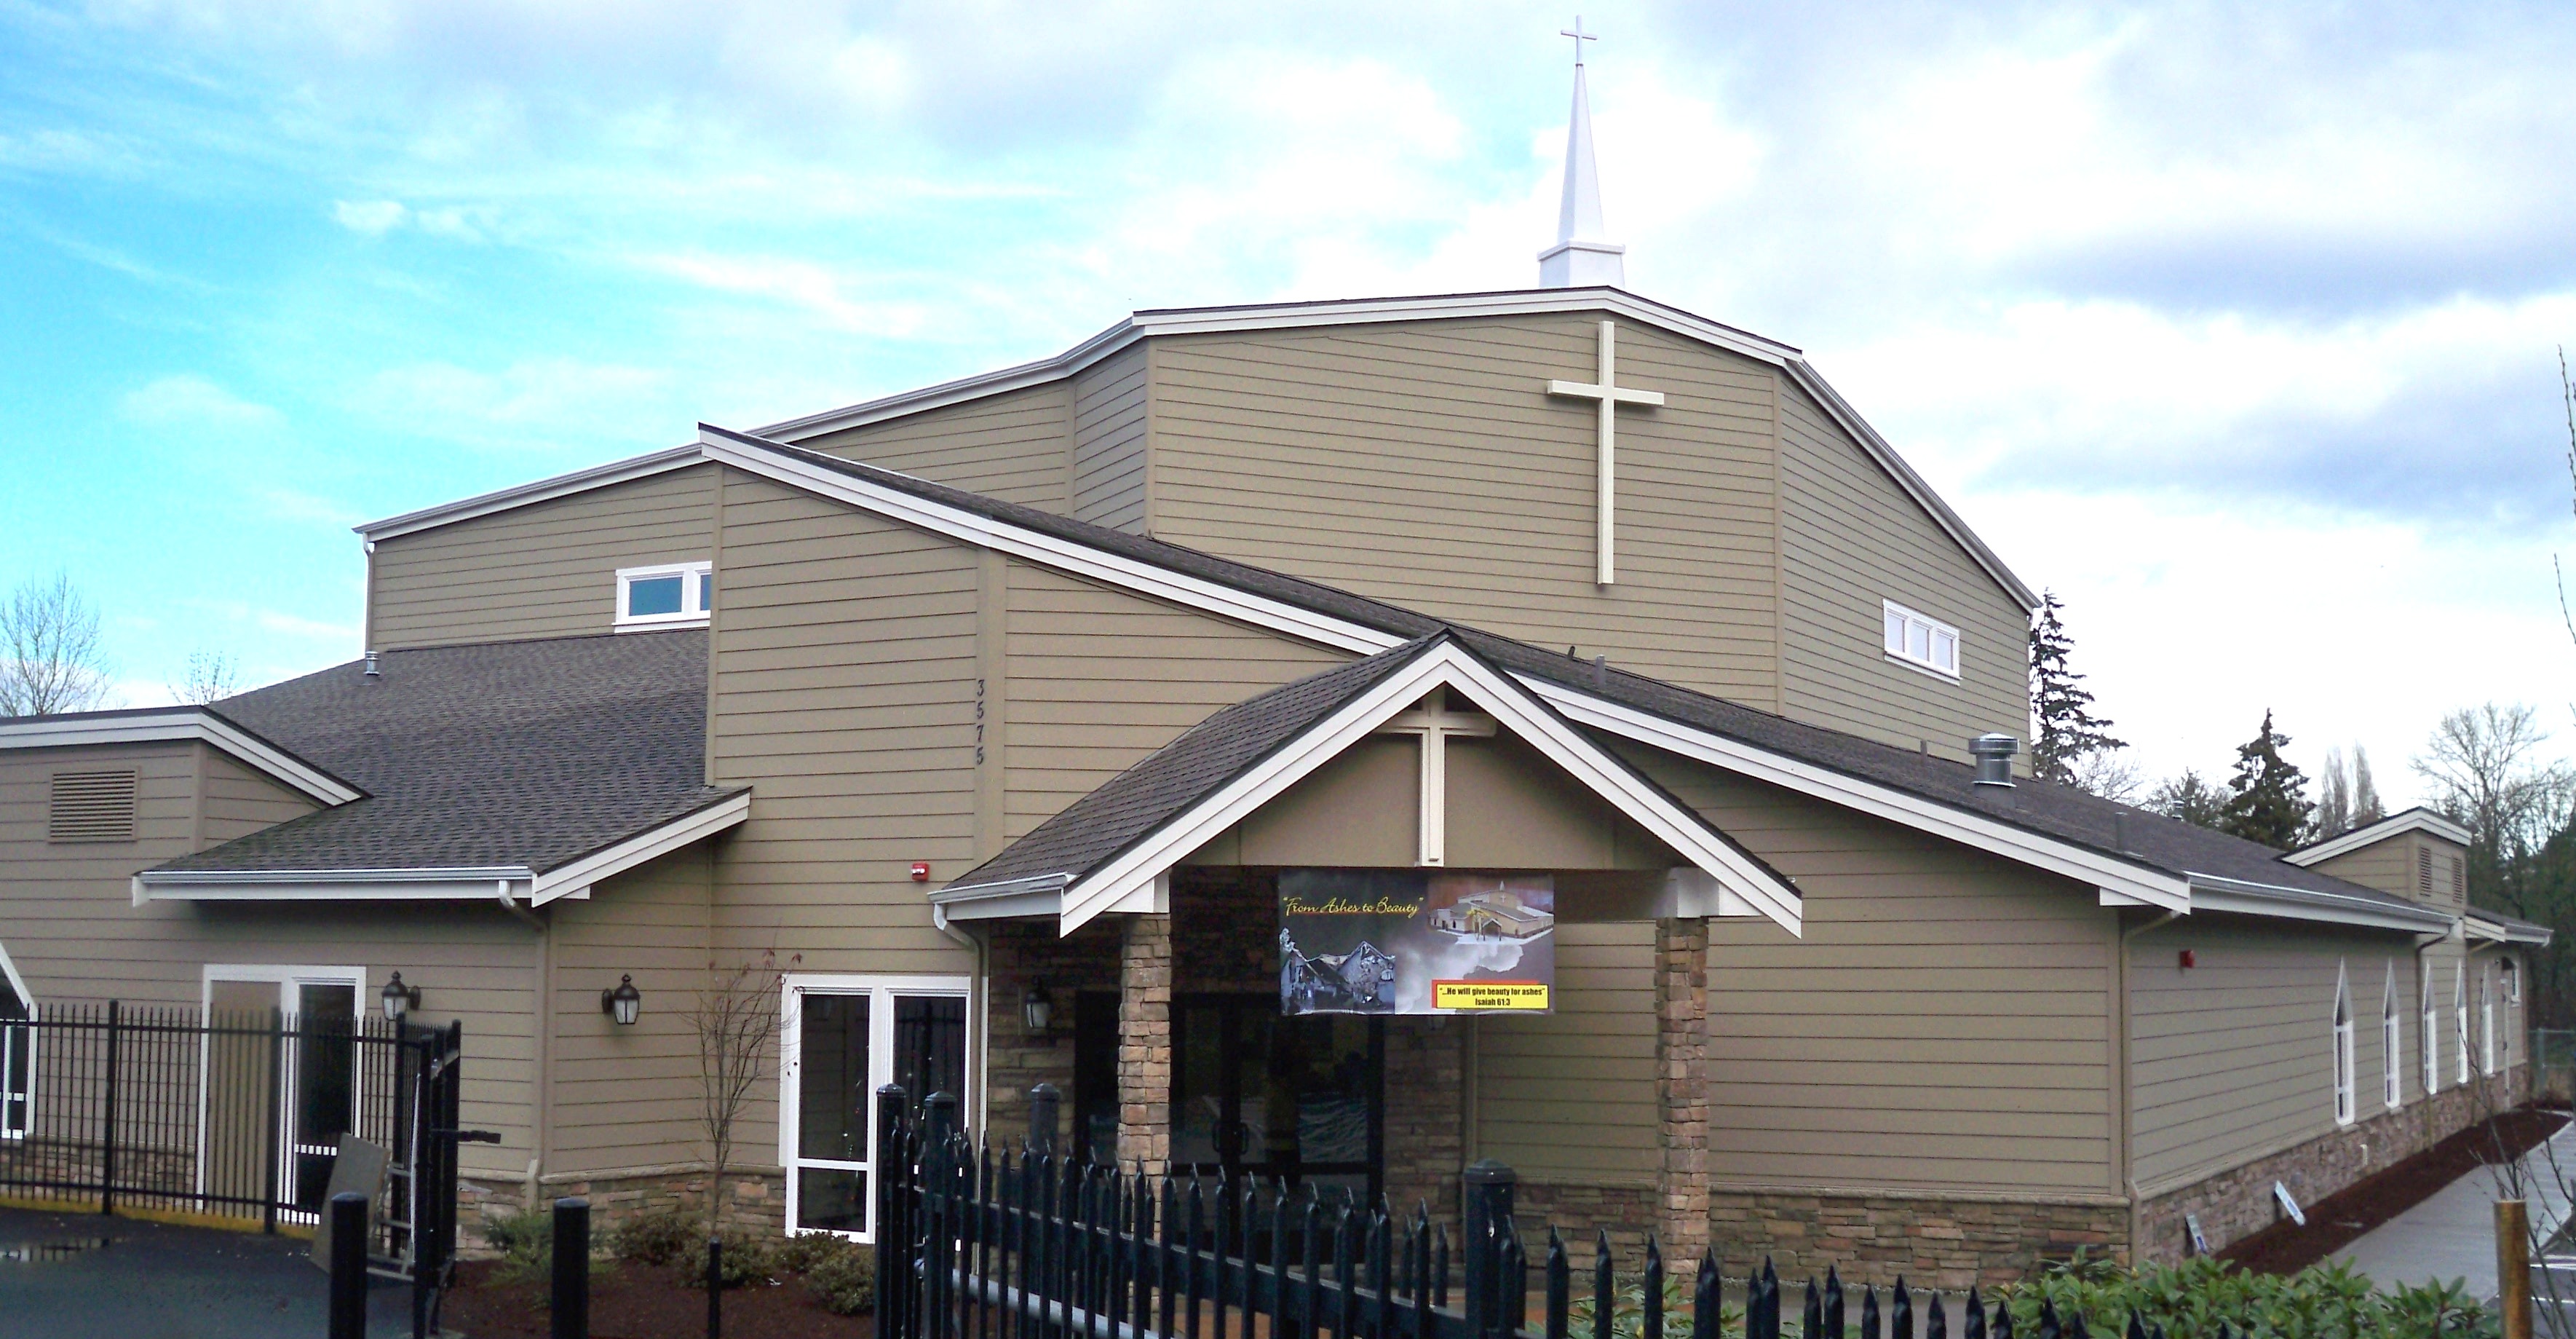 Eastside Baptist Church - where God is praised and disciples are made!